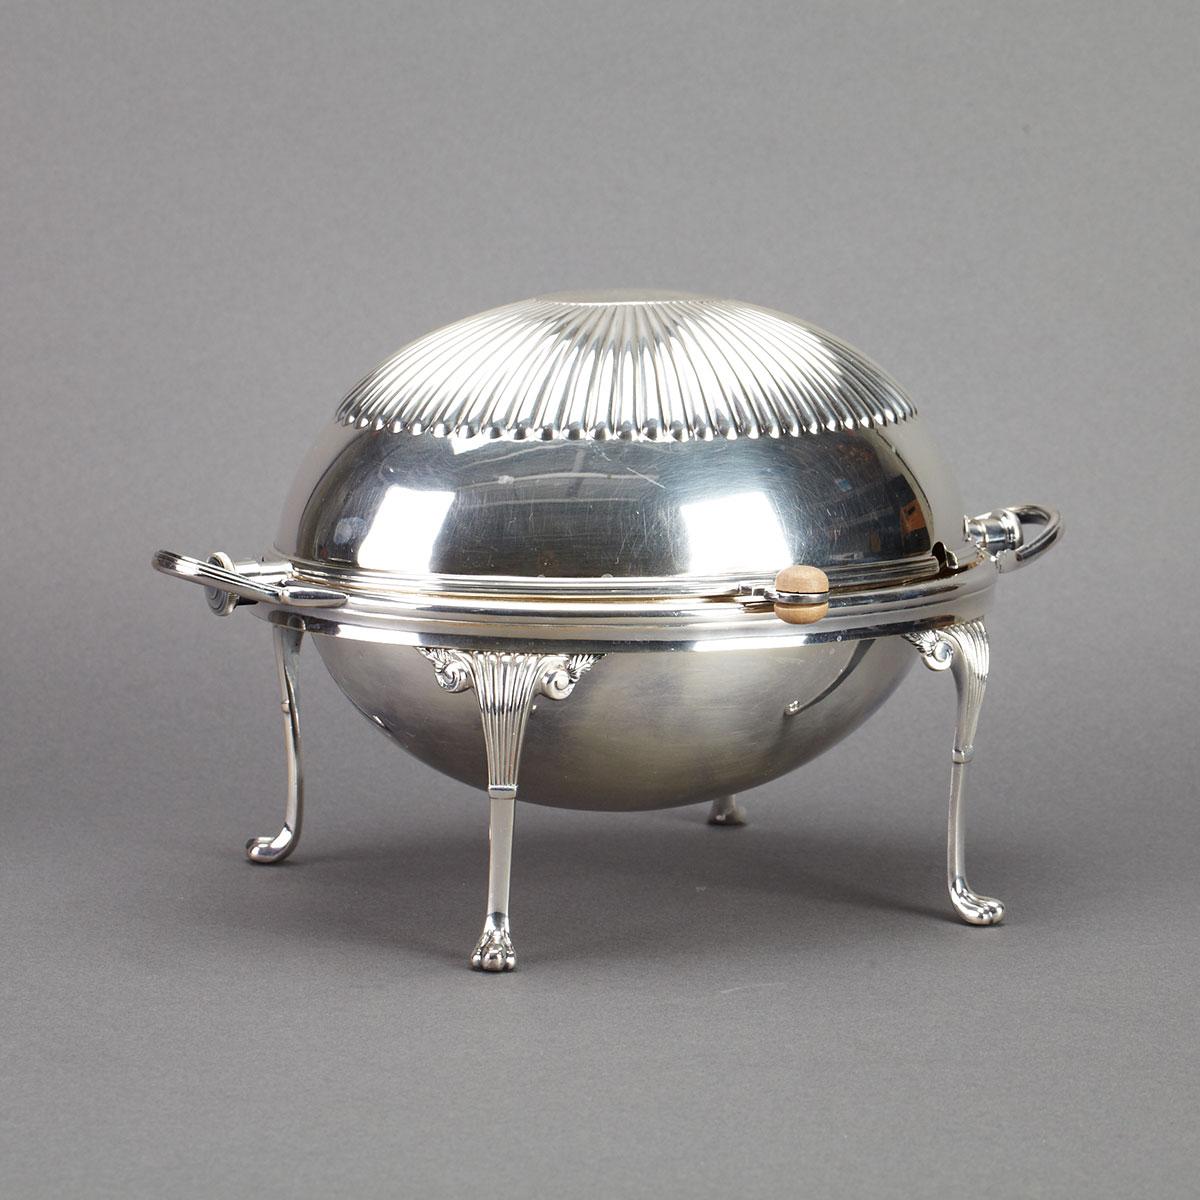 Late Victorian Silver Plated Oval Breakfast Dish, Harrison Bros. & Howson, late 19th century